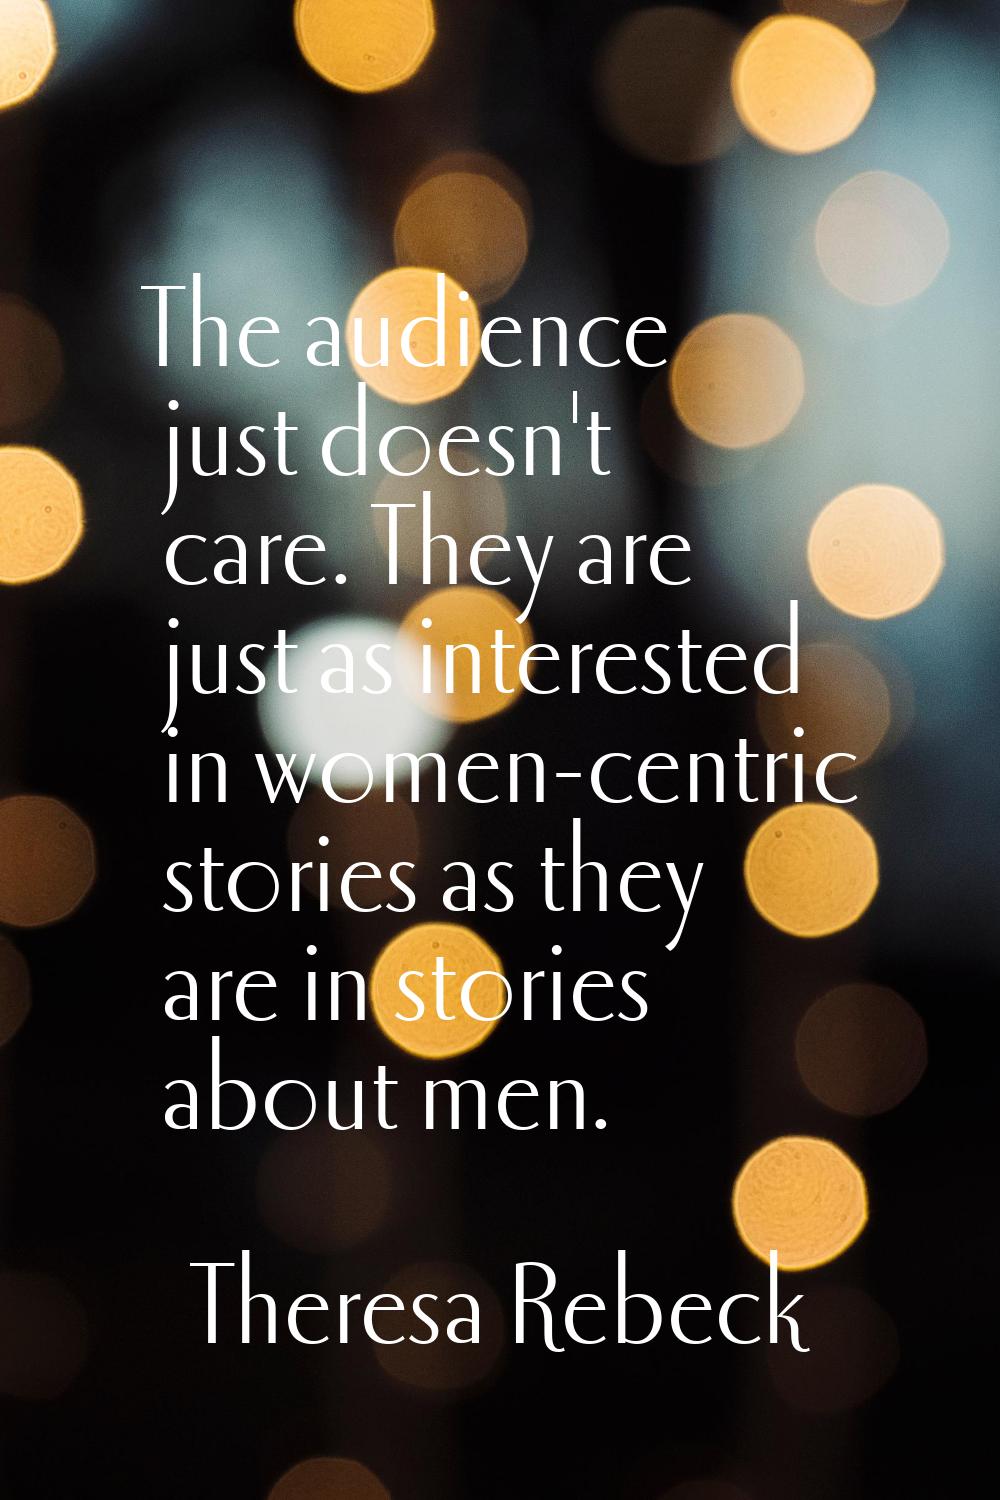 The audience just doesn't care. They are just as interested in women-centric stories as they are in